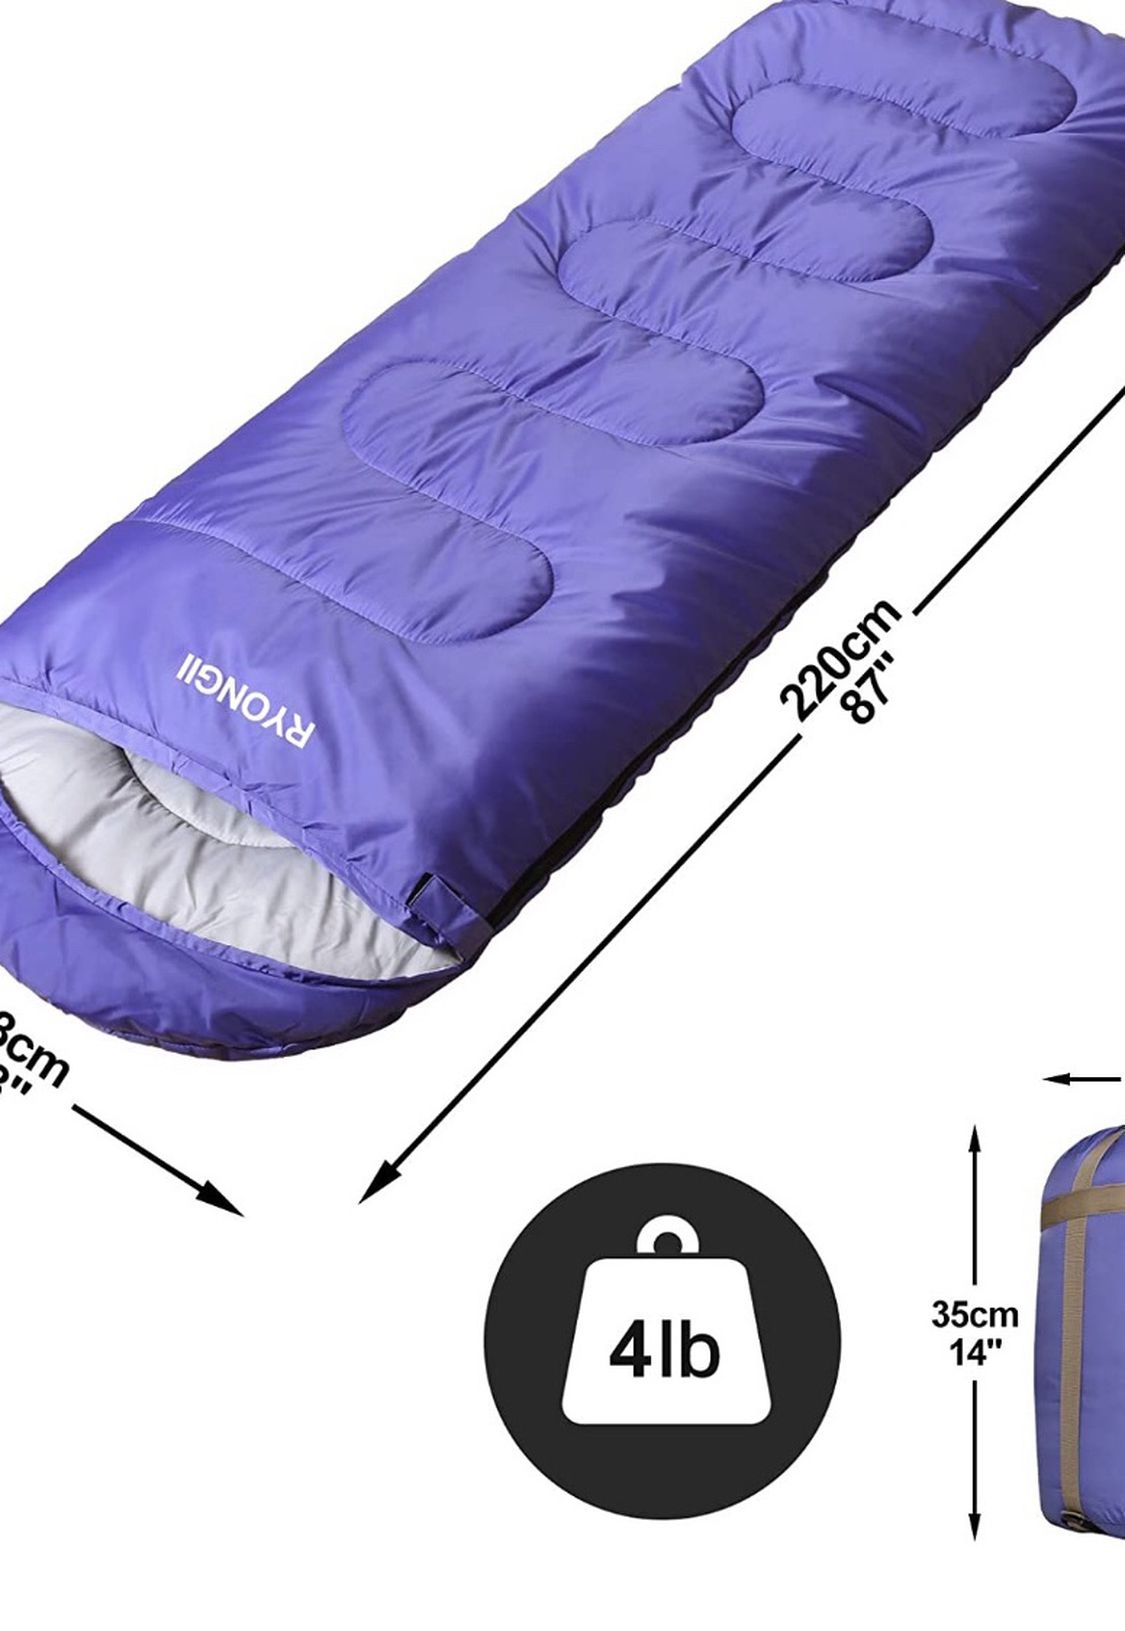 RYONGII Cool Weather Sleeping Bag for Adults Teens Kids - 4 Seasons Portable Lightweight Waterproof Youth for Indoor & Outdoor, Camping and Backpackin